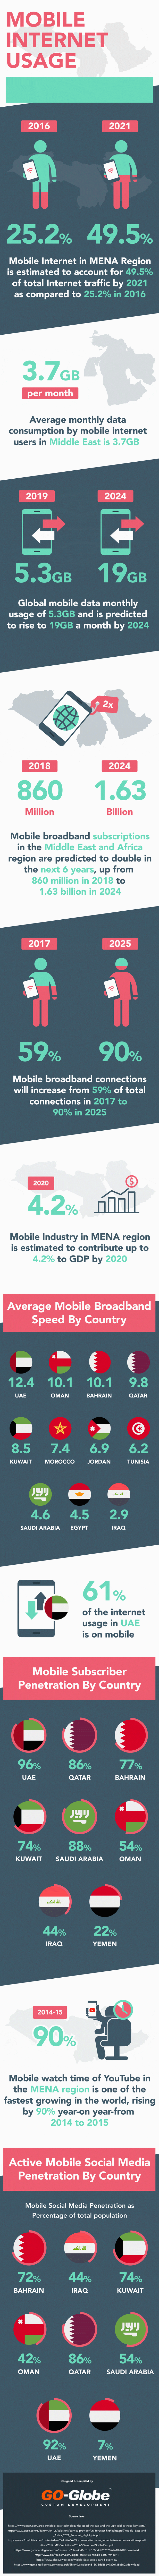 Mobile Internet Usage In Middle East – Statistics And Trends